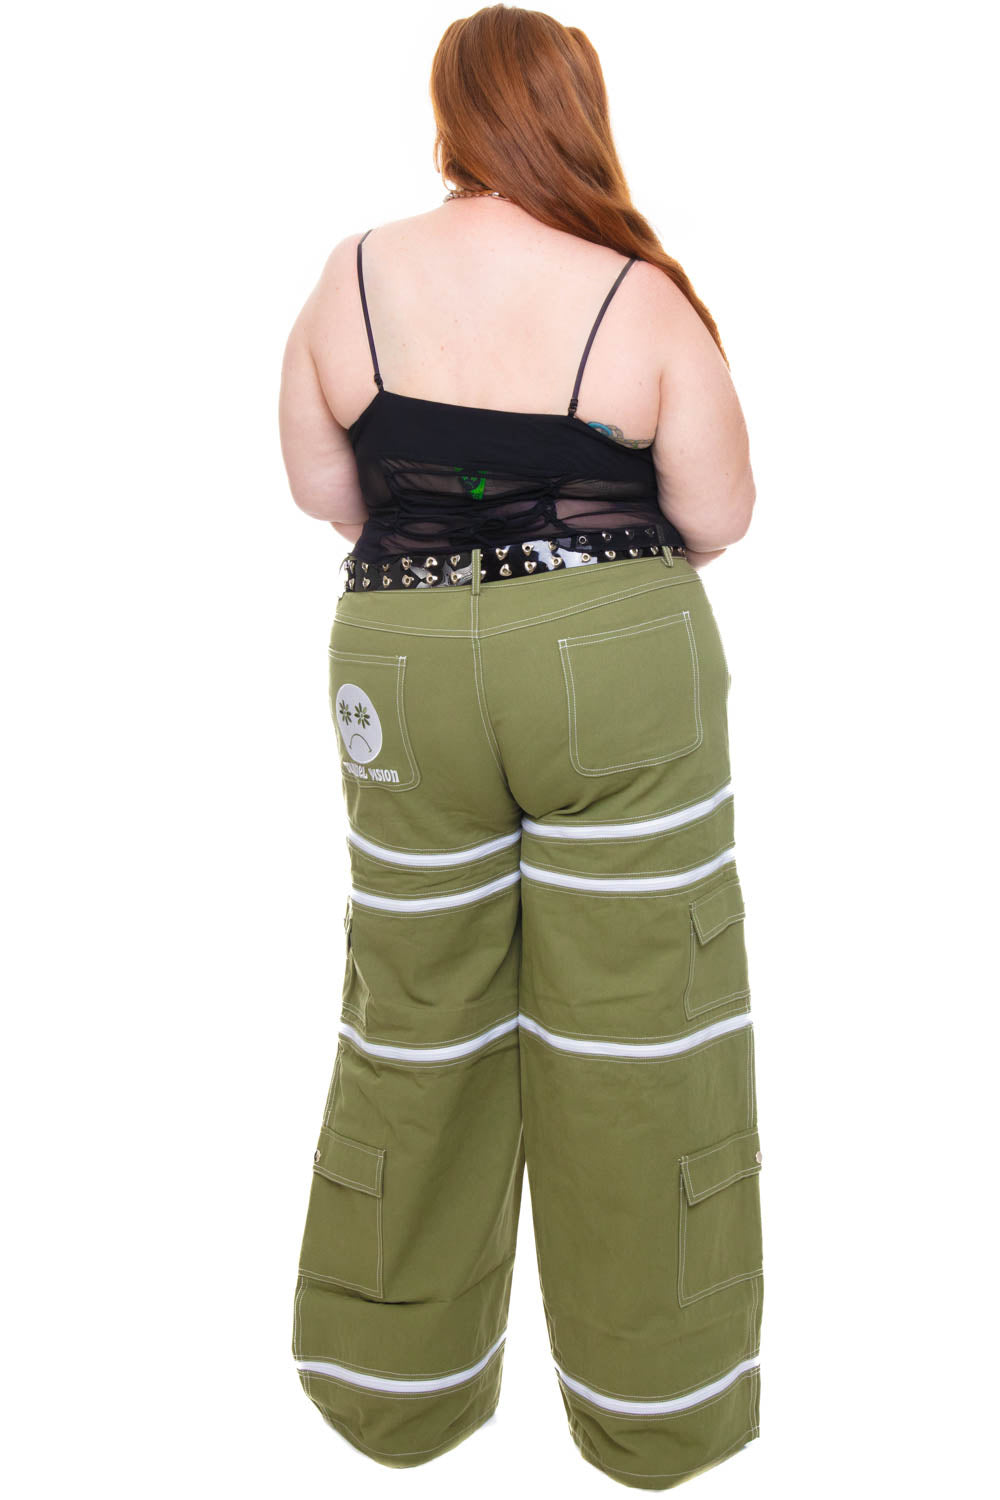 Pants Vision Convertible Cargo 5-in-1 Olive Green – Zip-Off Tunnel